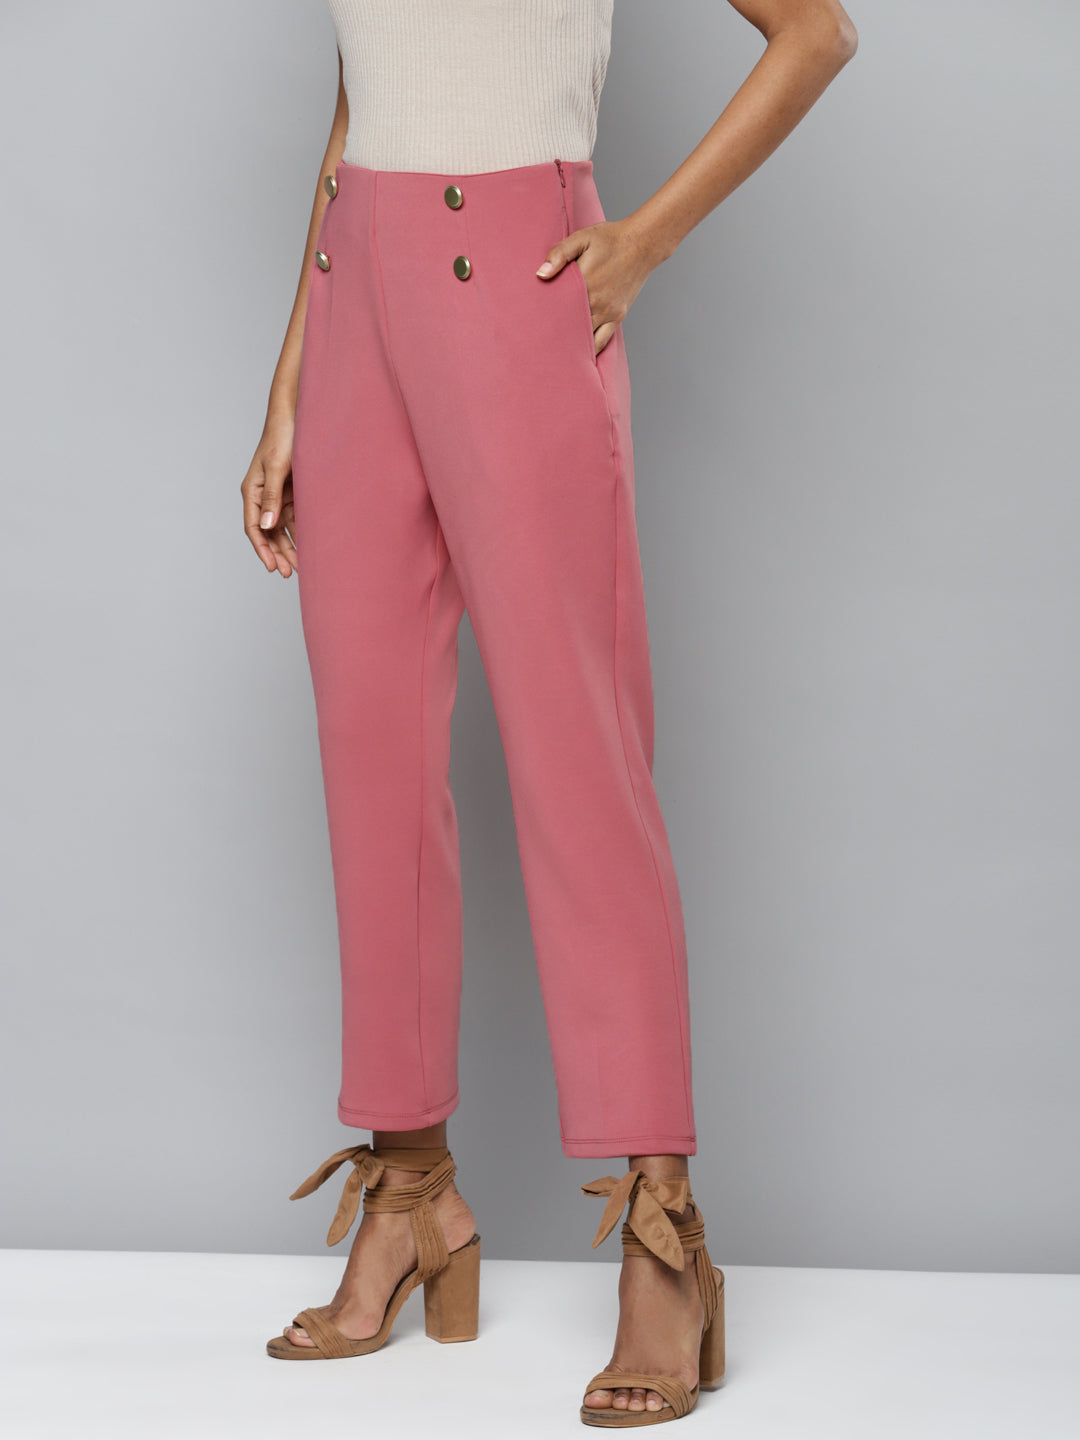 Does anyone know the product name of the pink trousers, they're from Zara :  r/findfashion